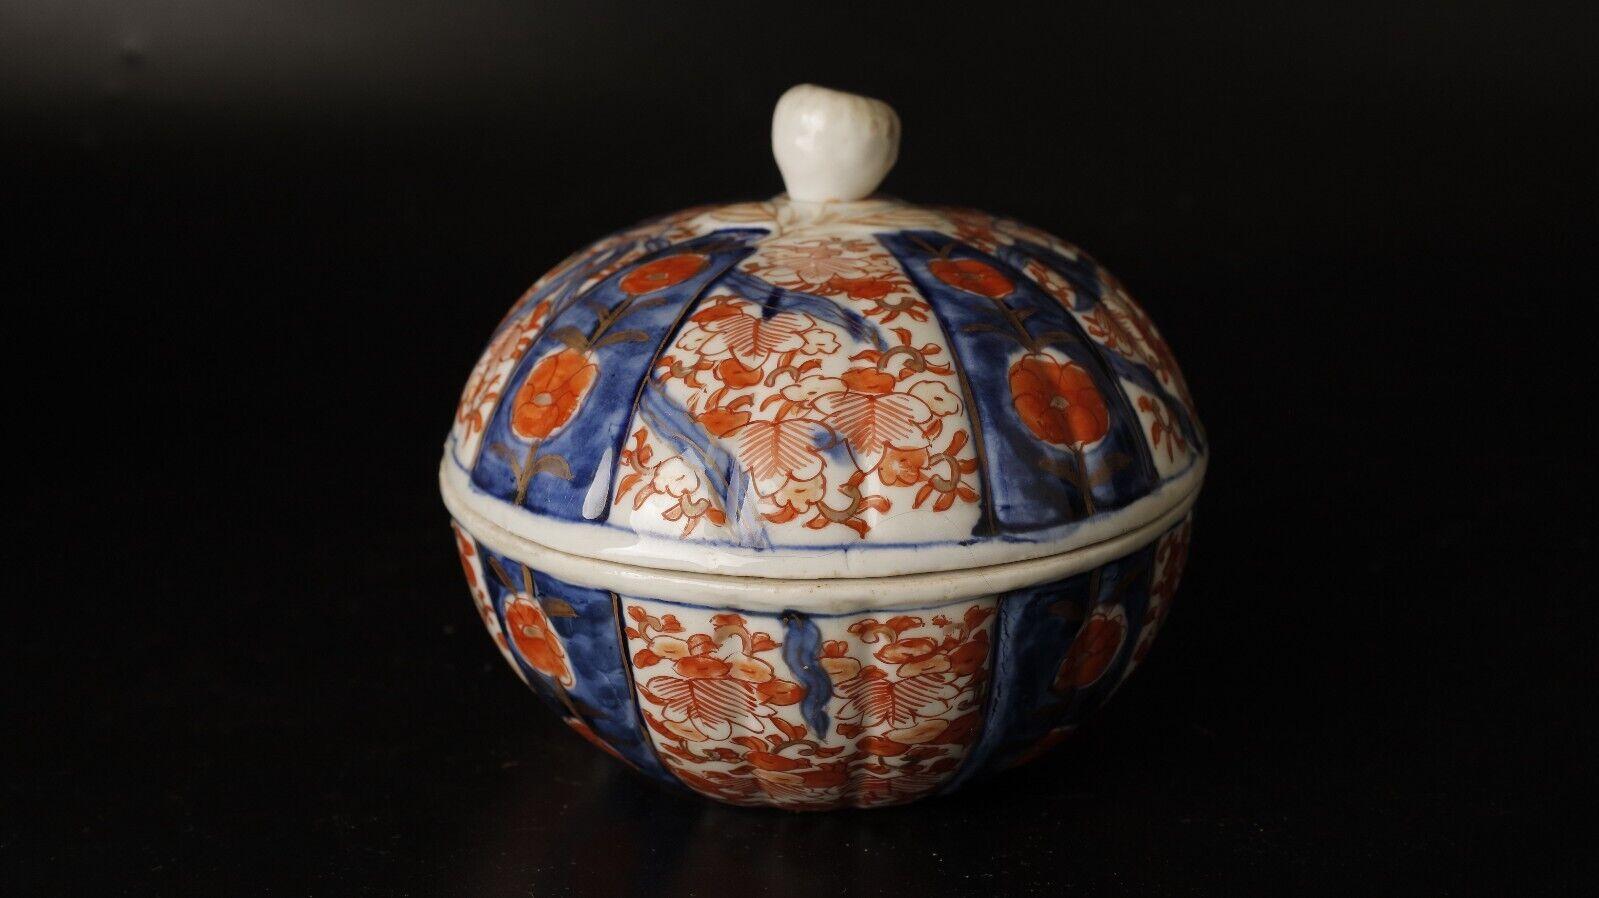 Very Fine and Rare Early Hand-Painted Imari Porcelain Covered Bowl

This very fine and rare early hand-painted Imari porcelain-covered bowl is a stunning example of Japanese craftsmanship. It is from the late Edo period, 18th-19th century. The bowl